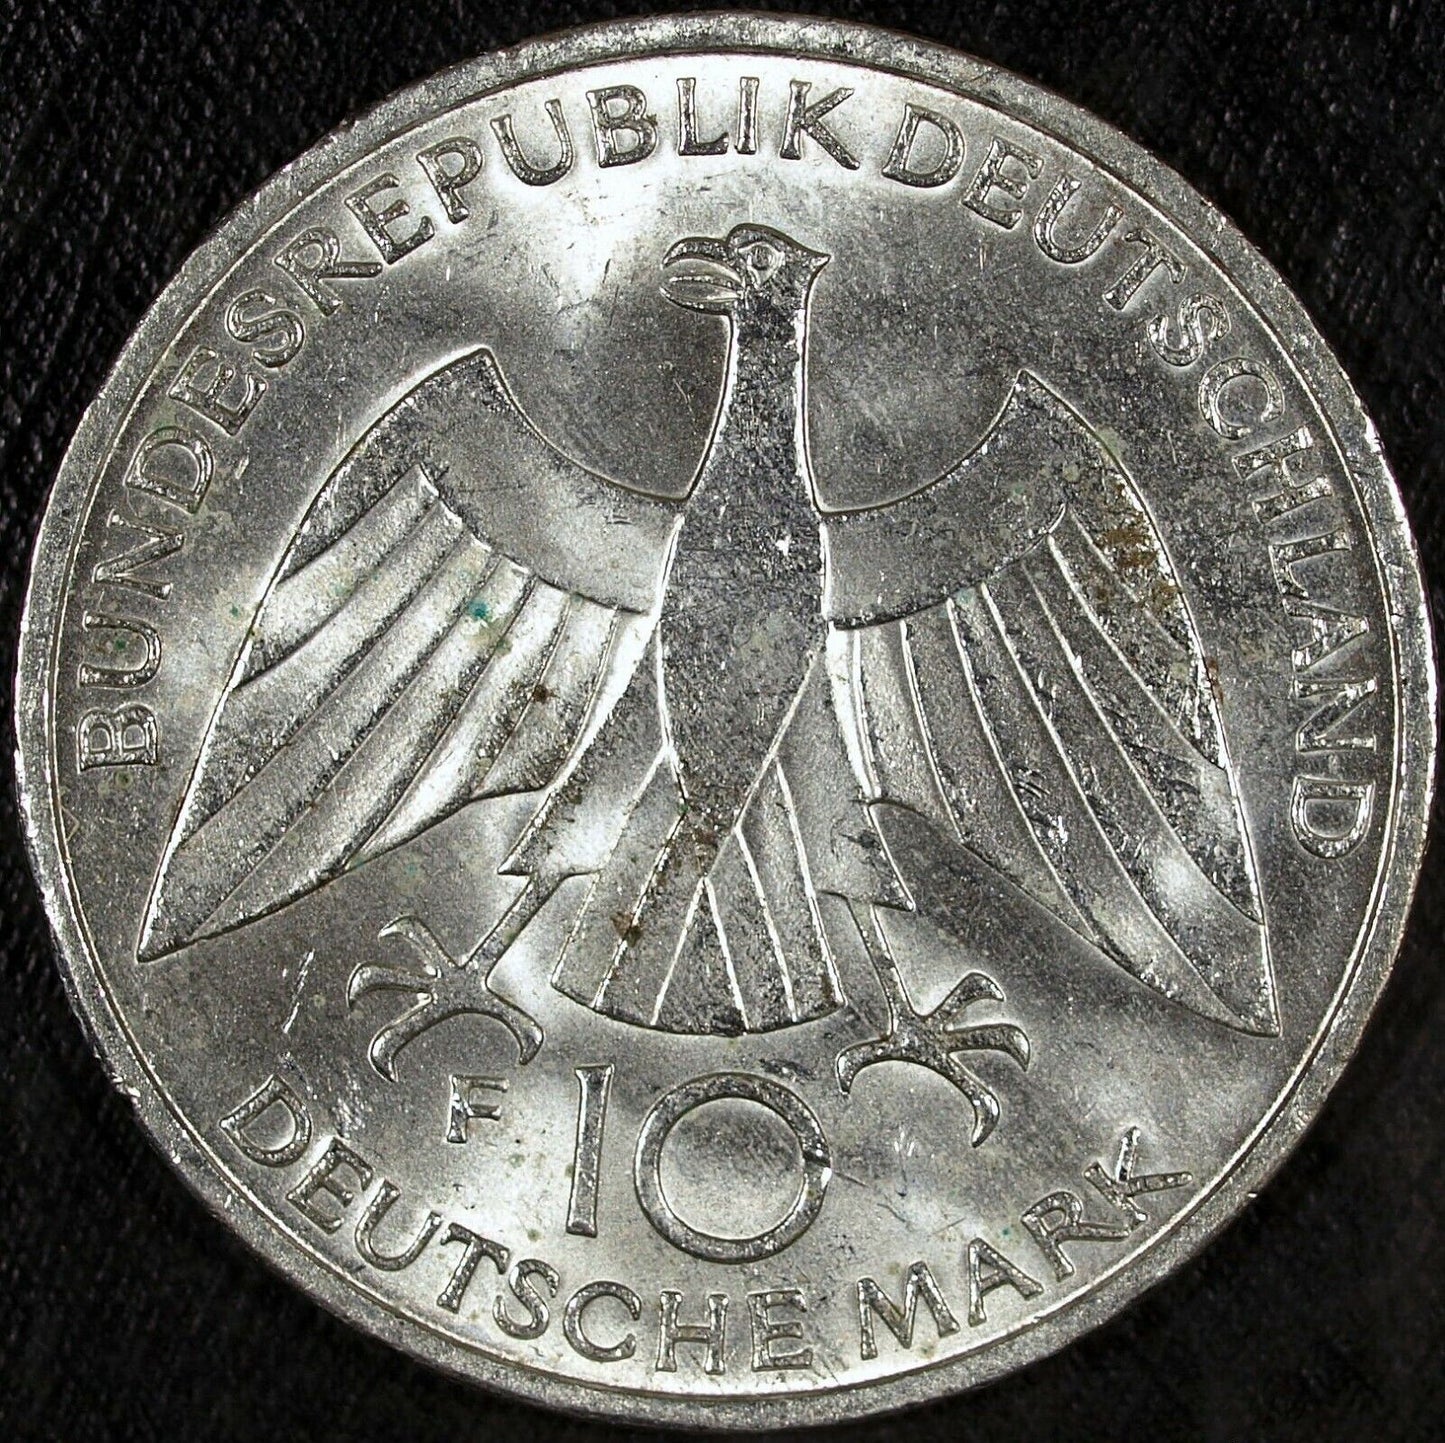 1972 "F" Olympische Spiele Germany 10 Mark ☆☆ .625 Silver Coin ☆☆ 337